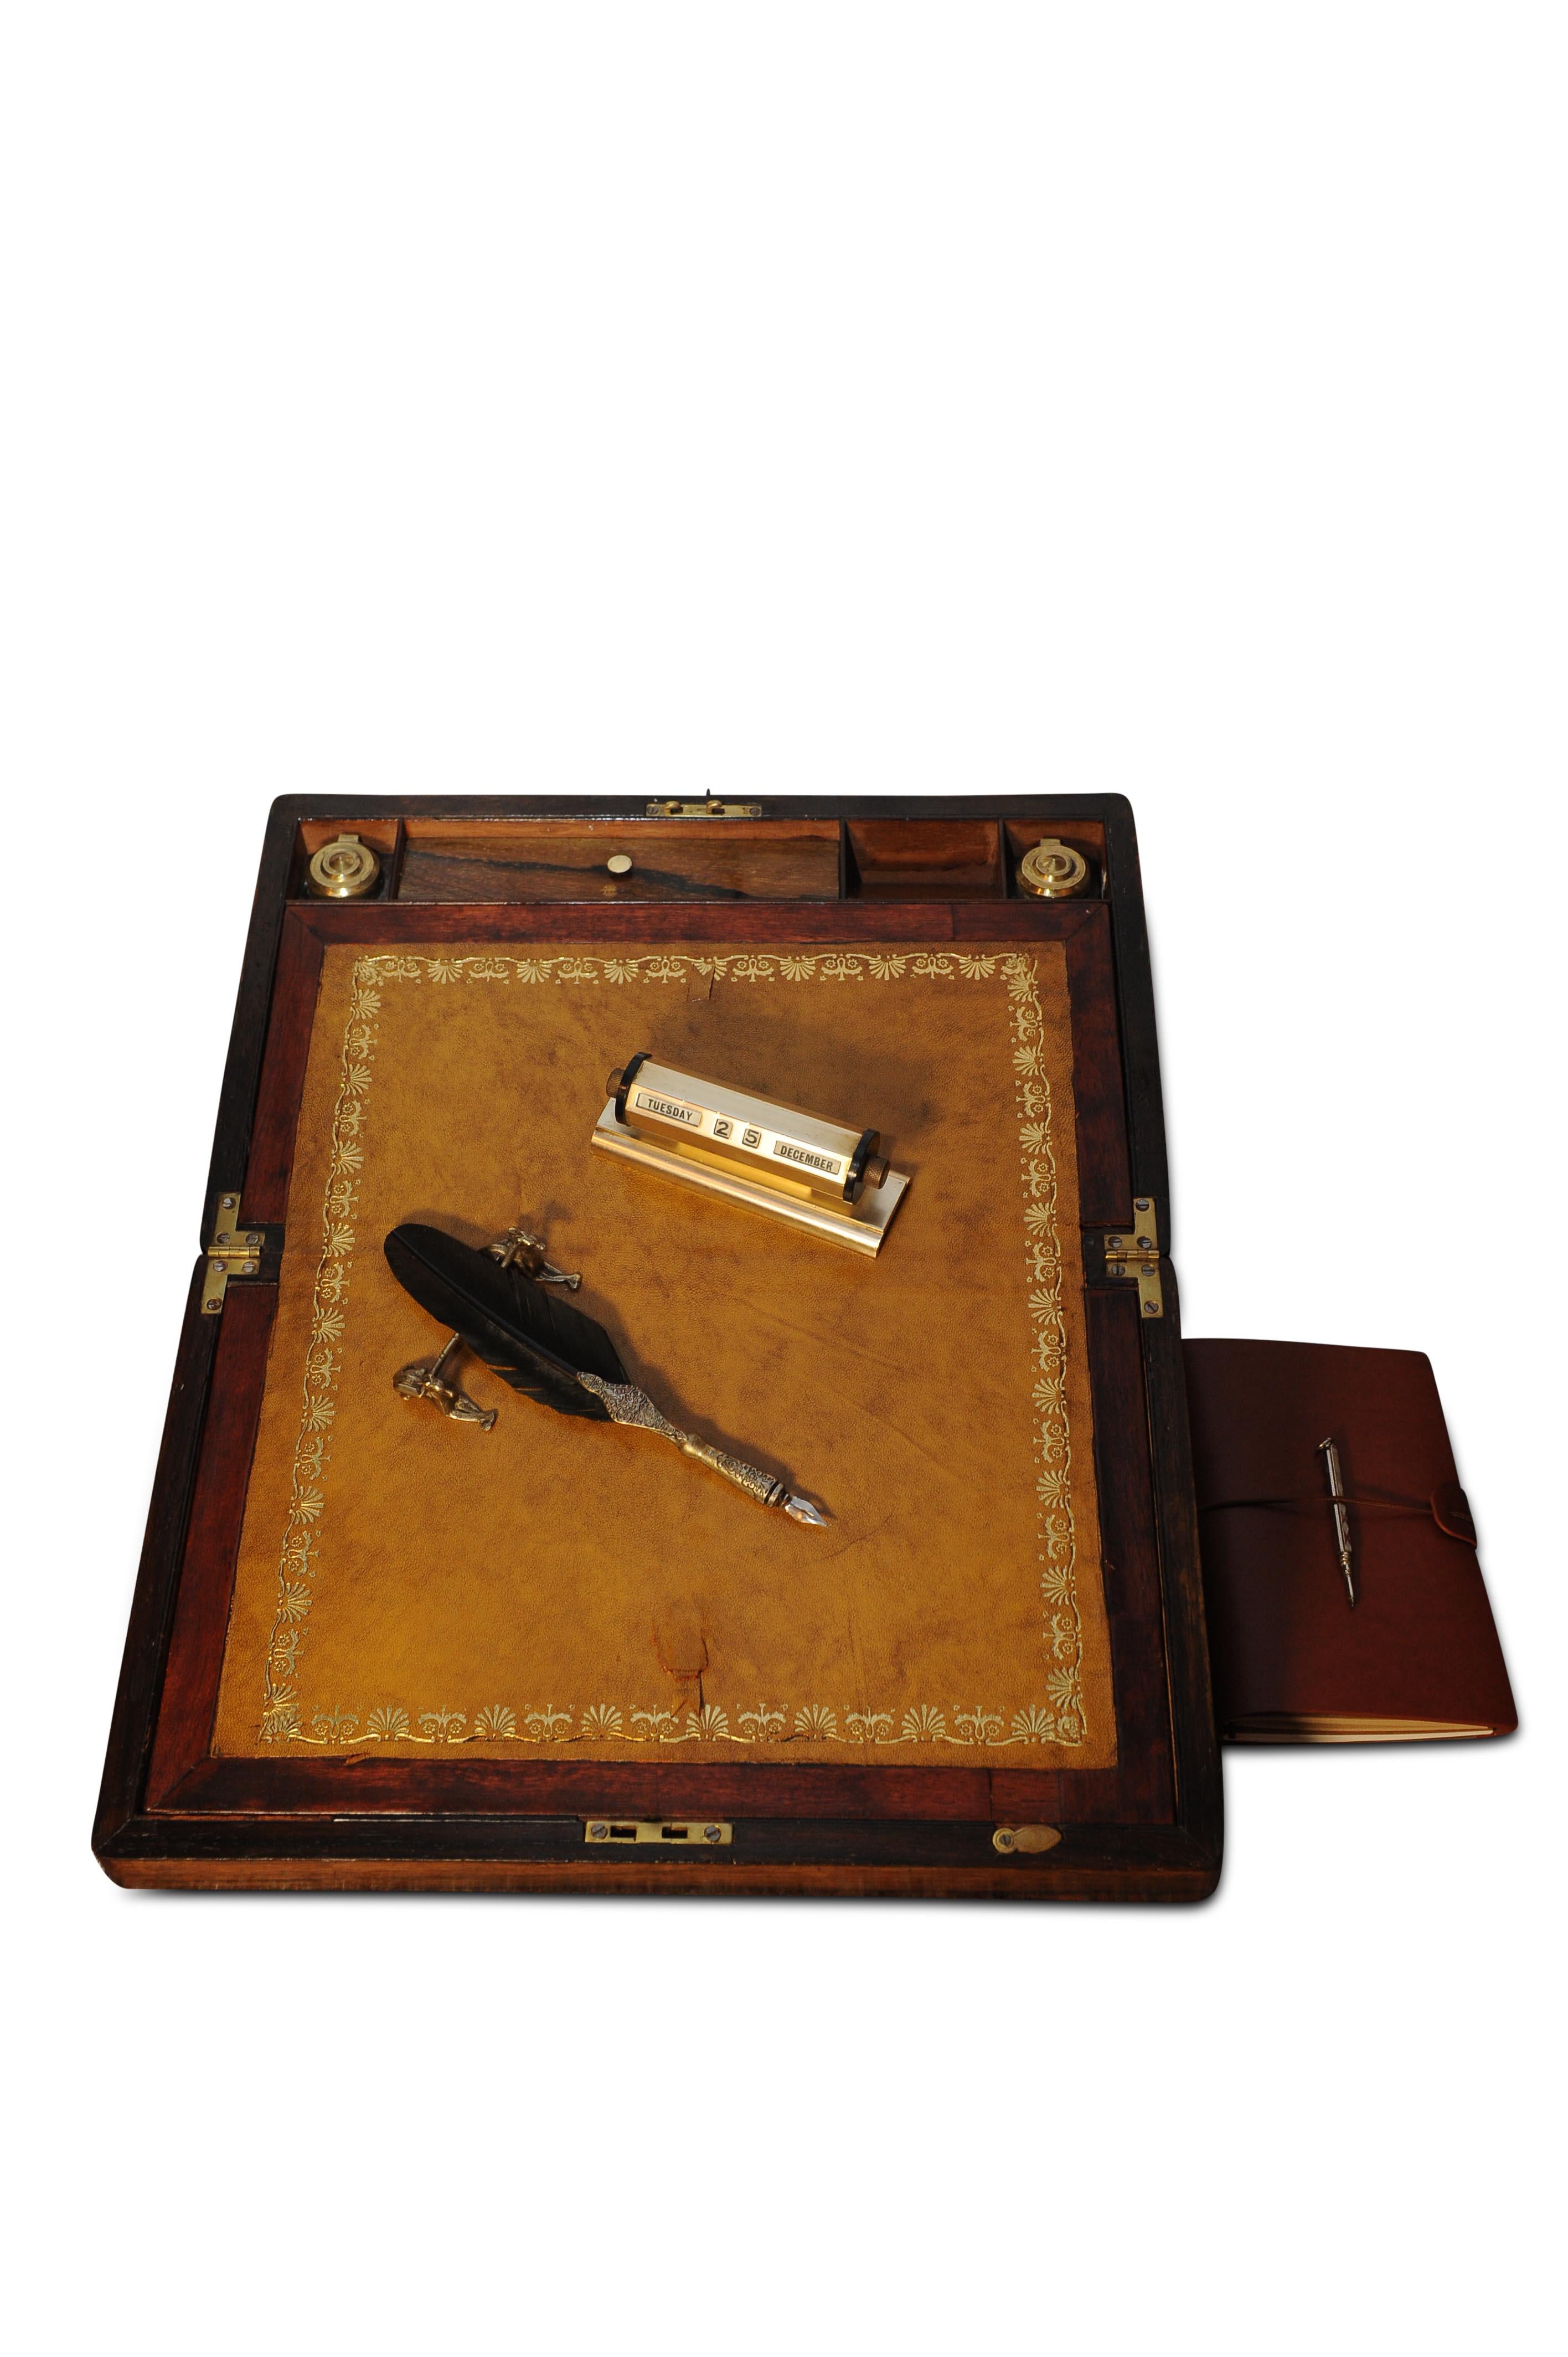 Hand-Crafted Exquisite Victorian Rosewood & Leather Tooled Writing Slope, Inkwell and Pen